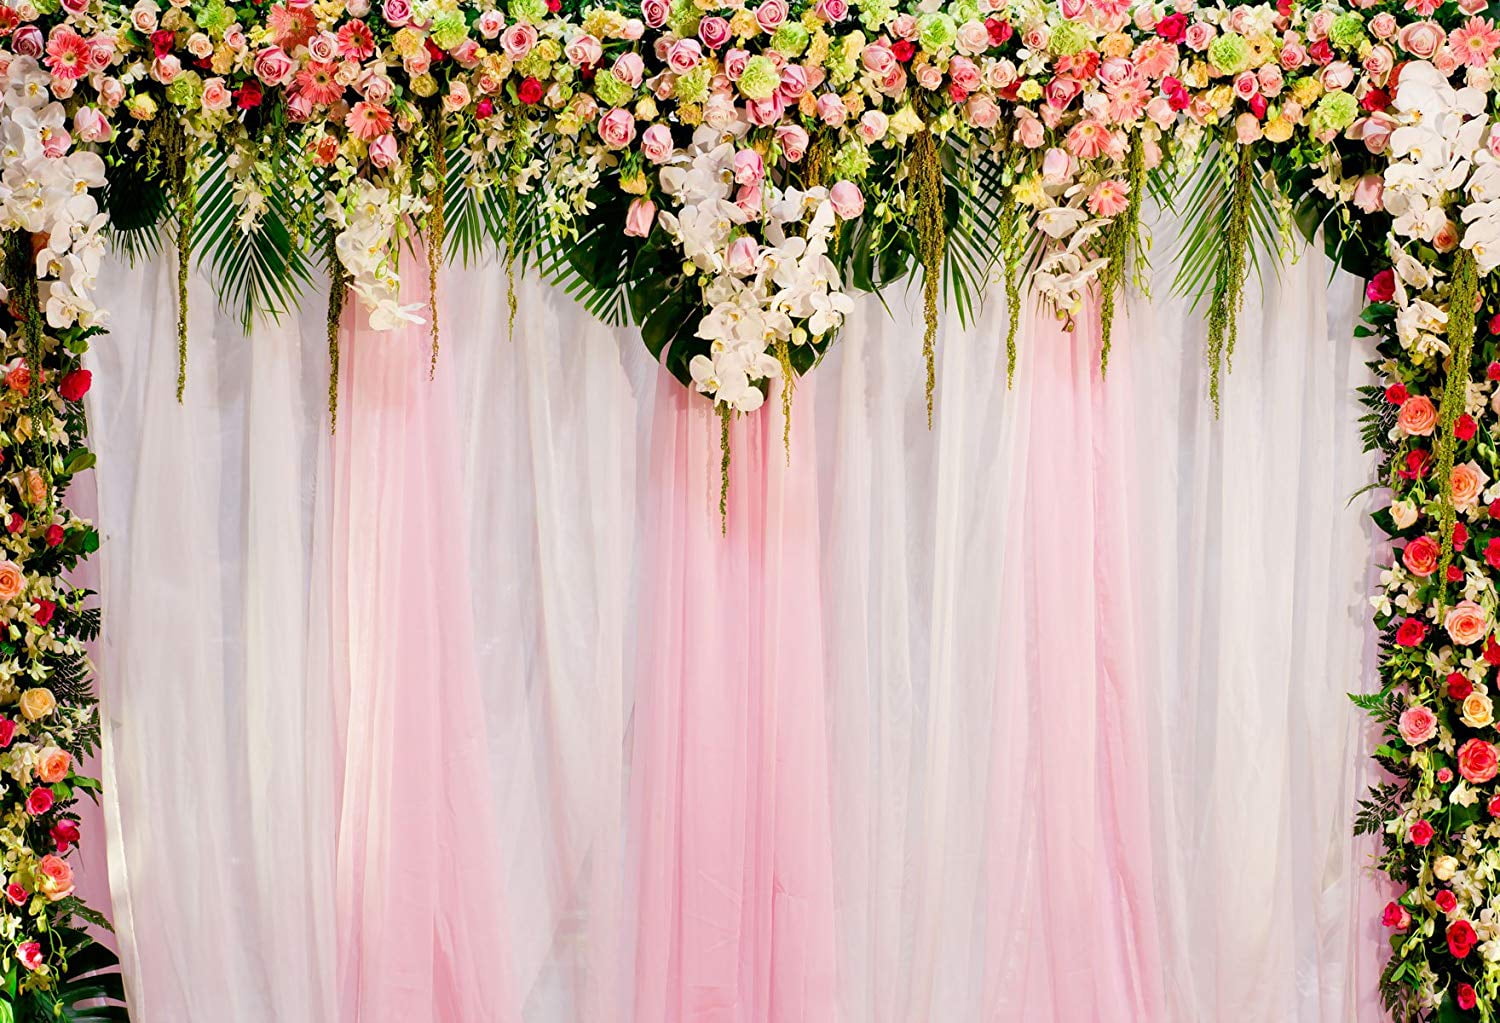 YongFoto 8x6ft Wedding Photography Backdrop Flowers Leaves Wall Ombre Pink Curtain Background Wedding Party Ceremony Stage Scene Lovers Bride Bridegroom Portrait Photo Studio Props 